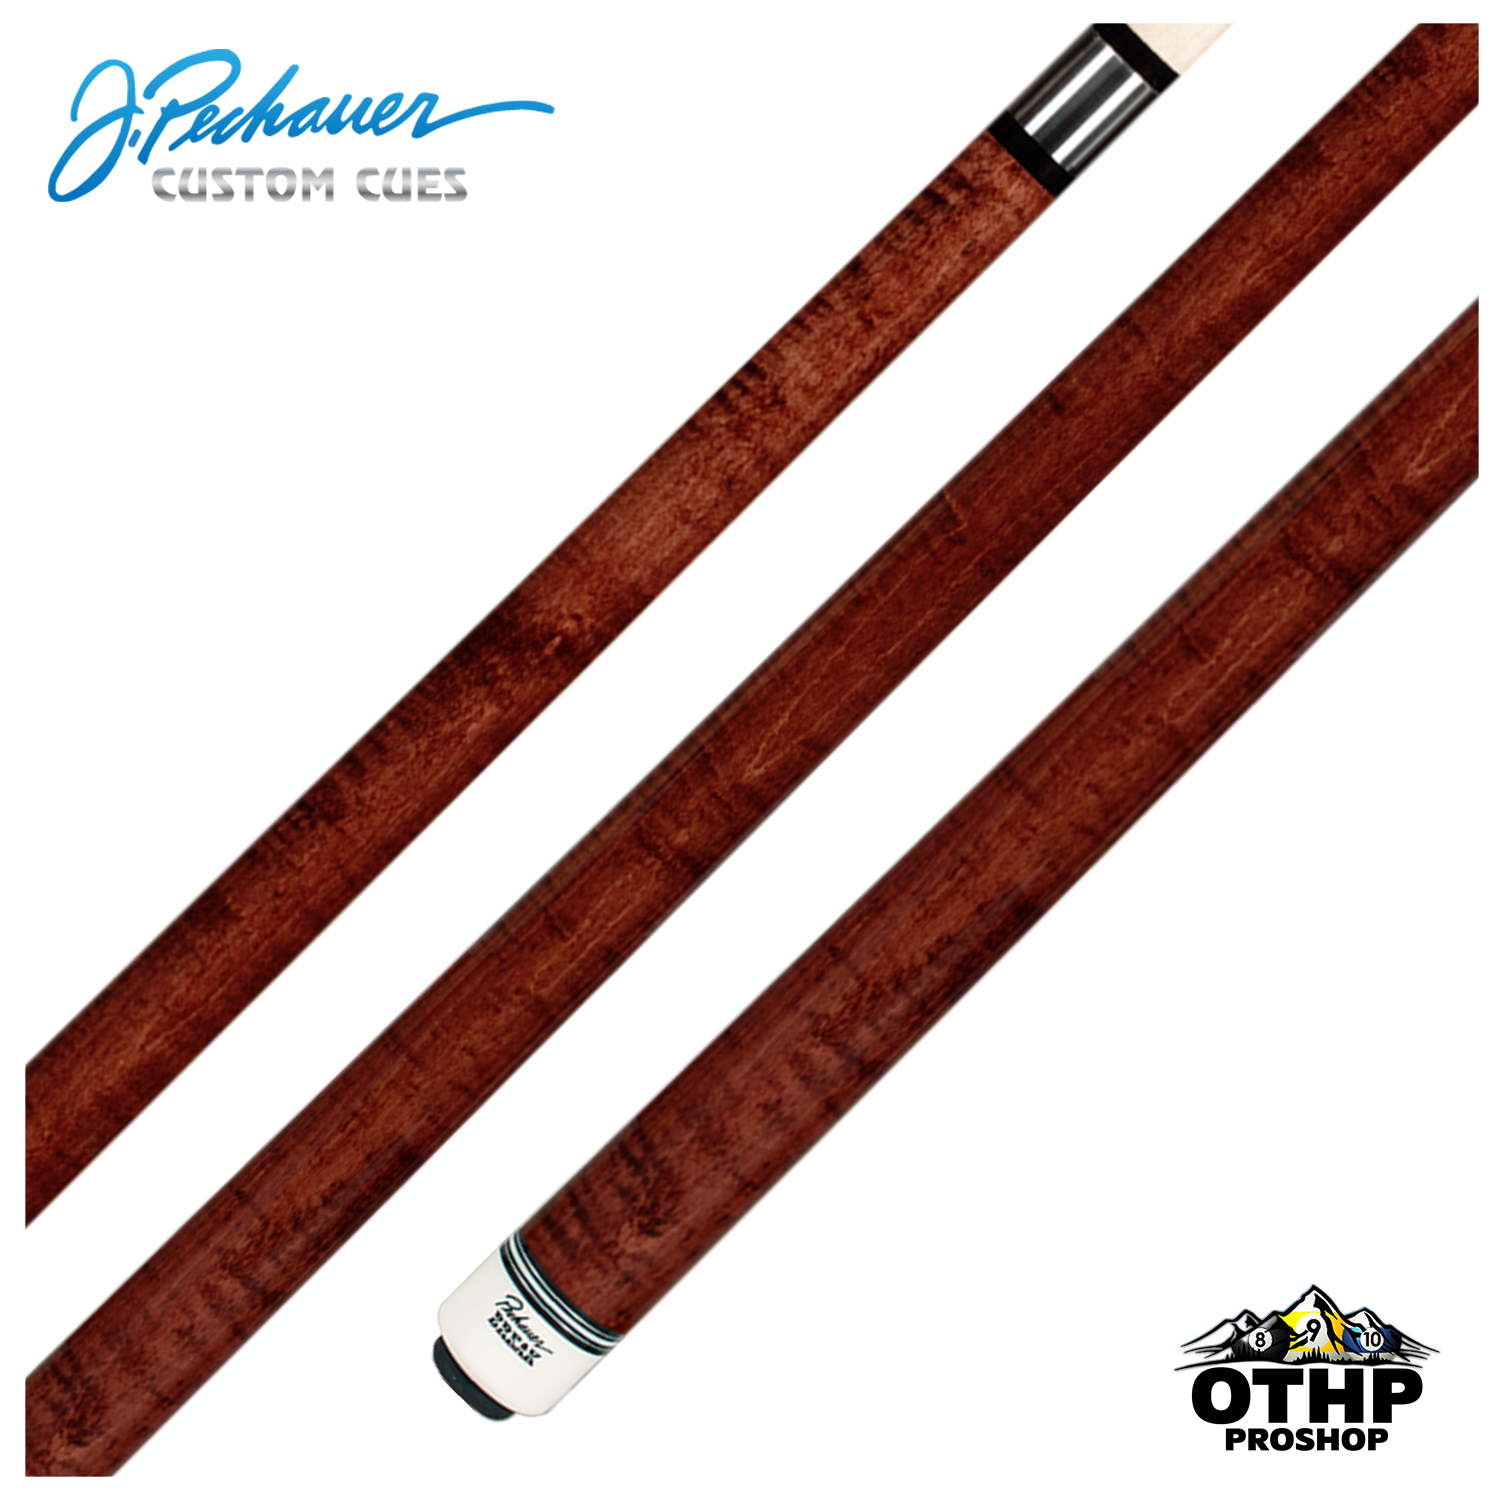 Pechauer Break Cue Rosewood stained Curly Maple